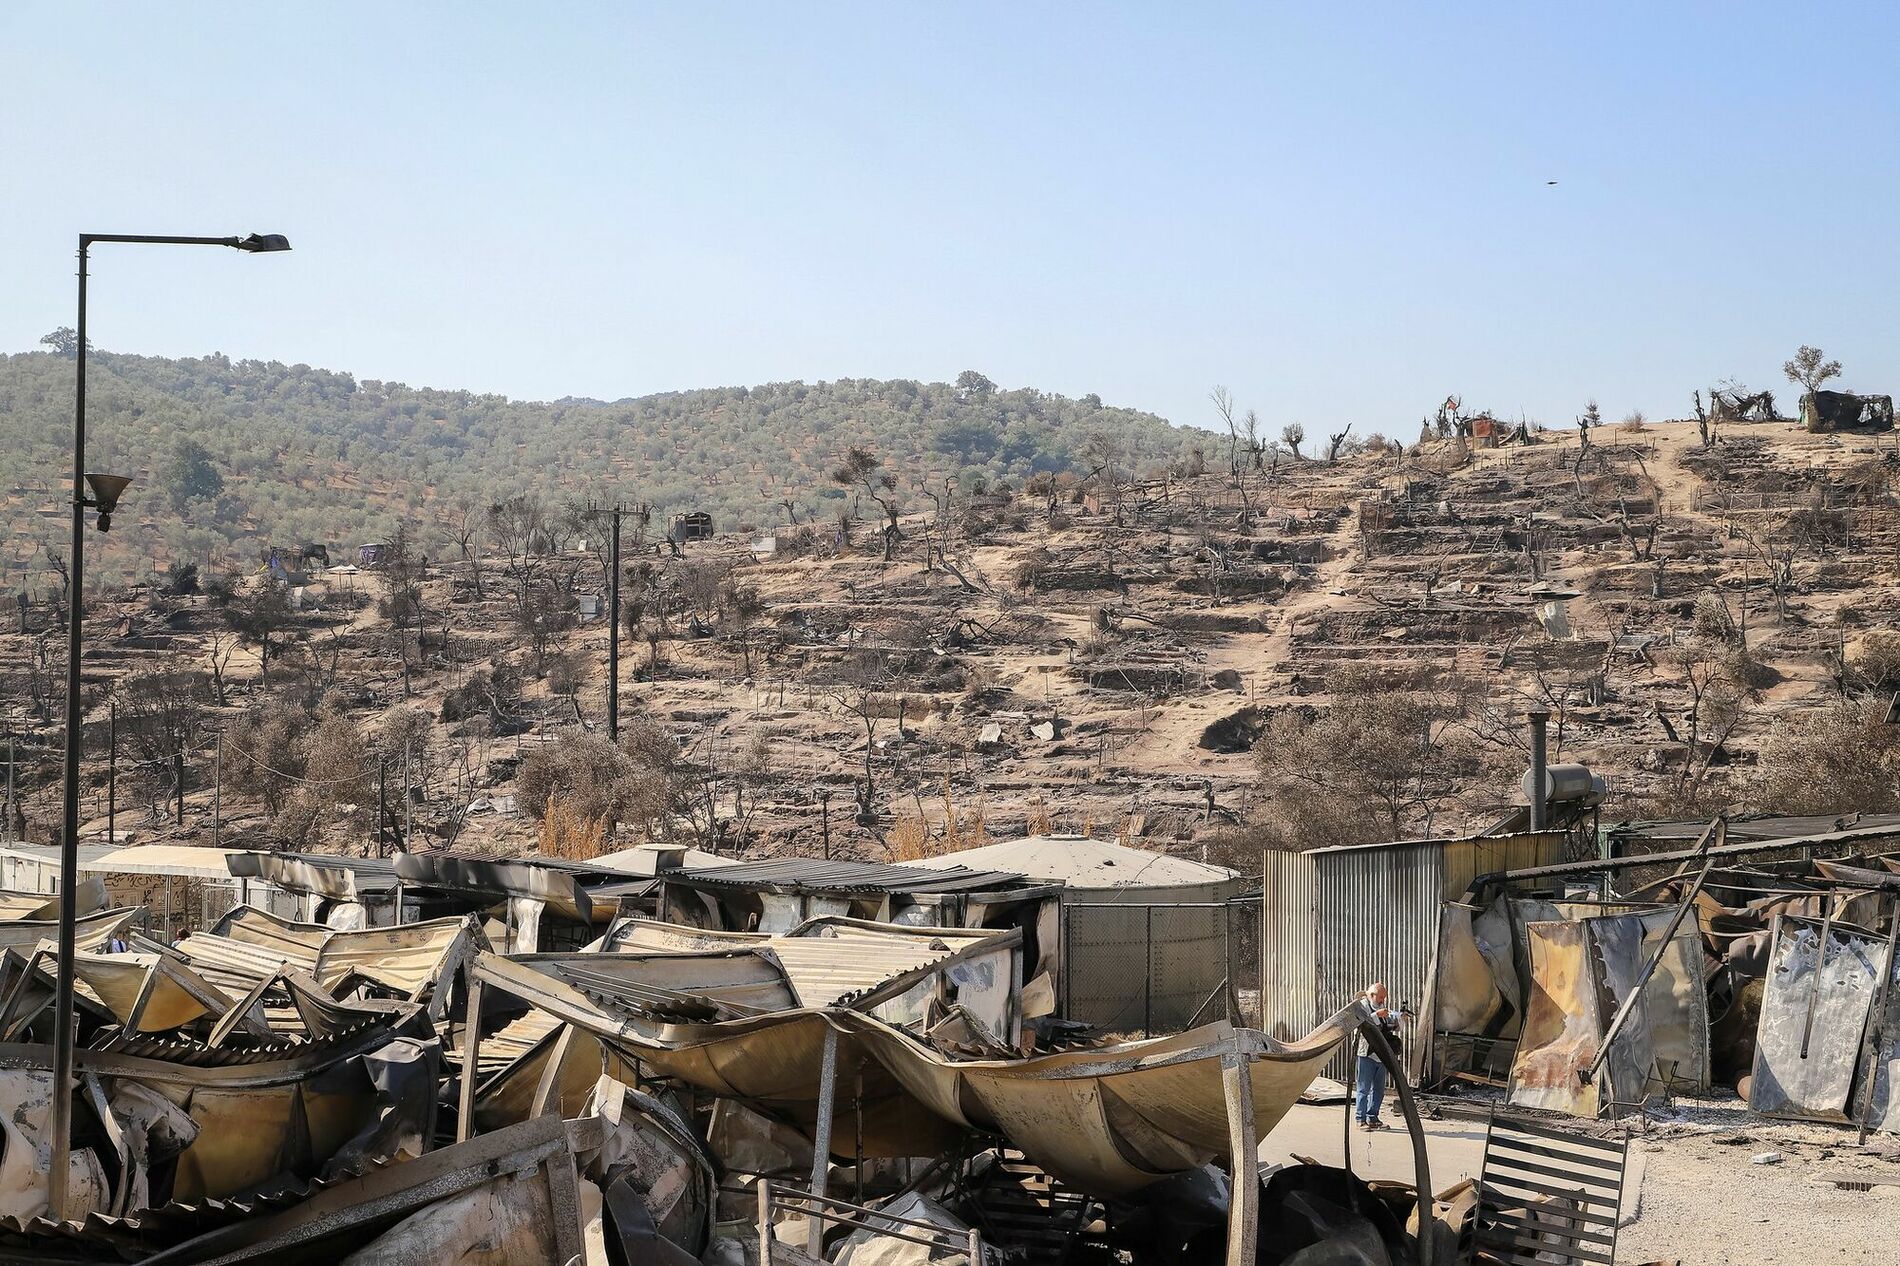 Burned hills with destroyed shelters in the refugee camp Moria, Lesbos.